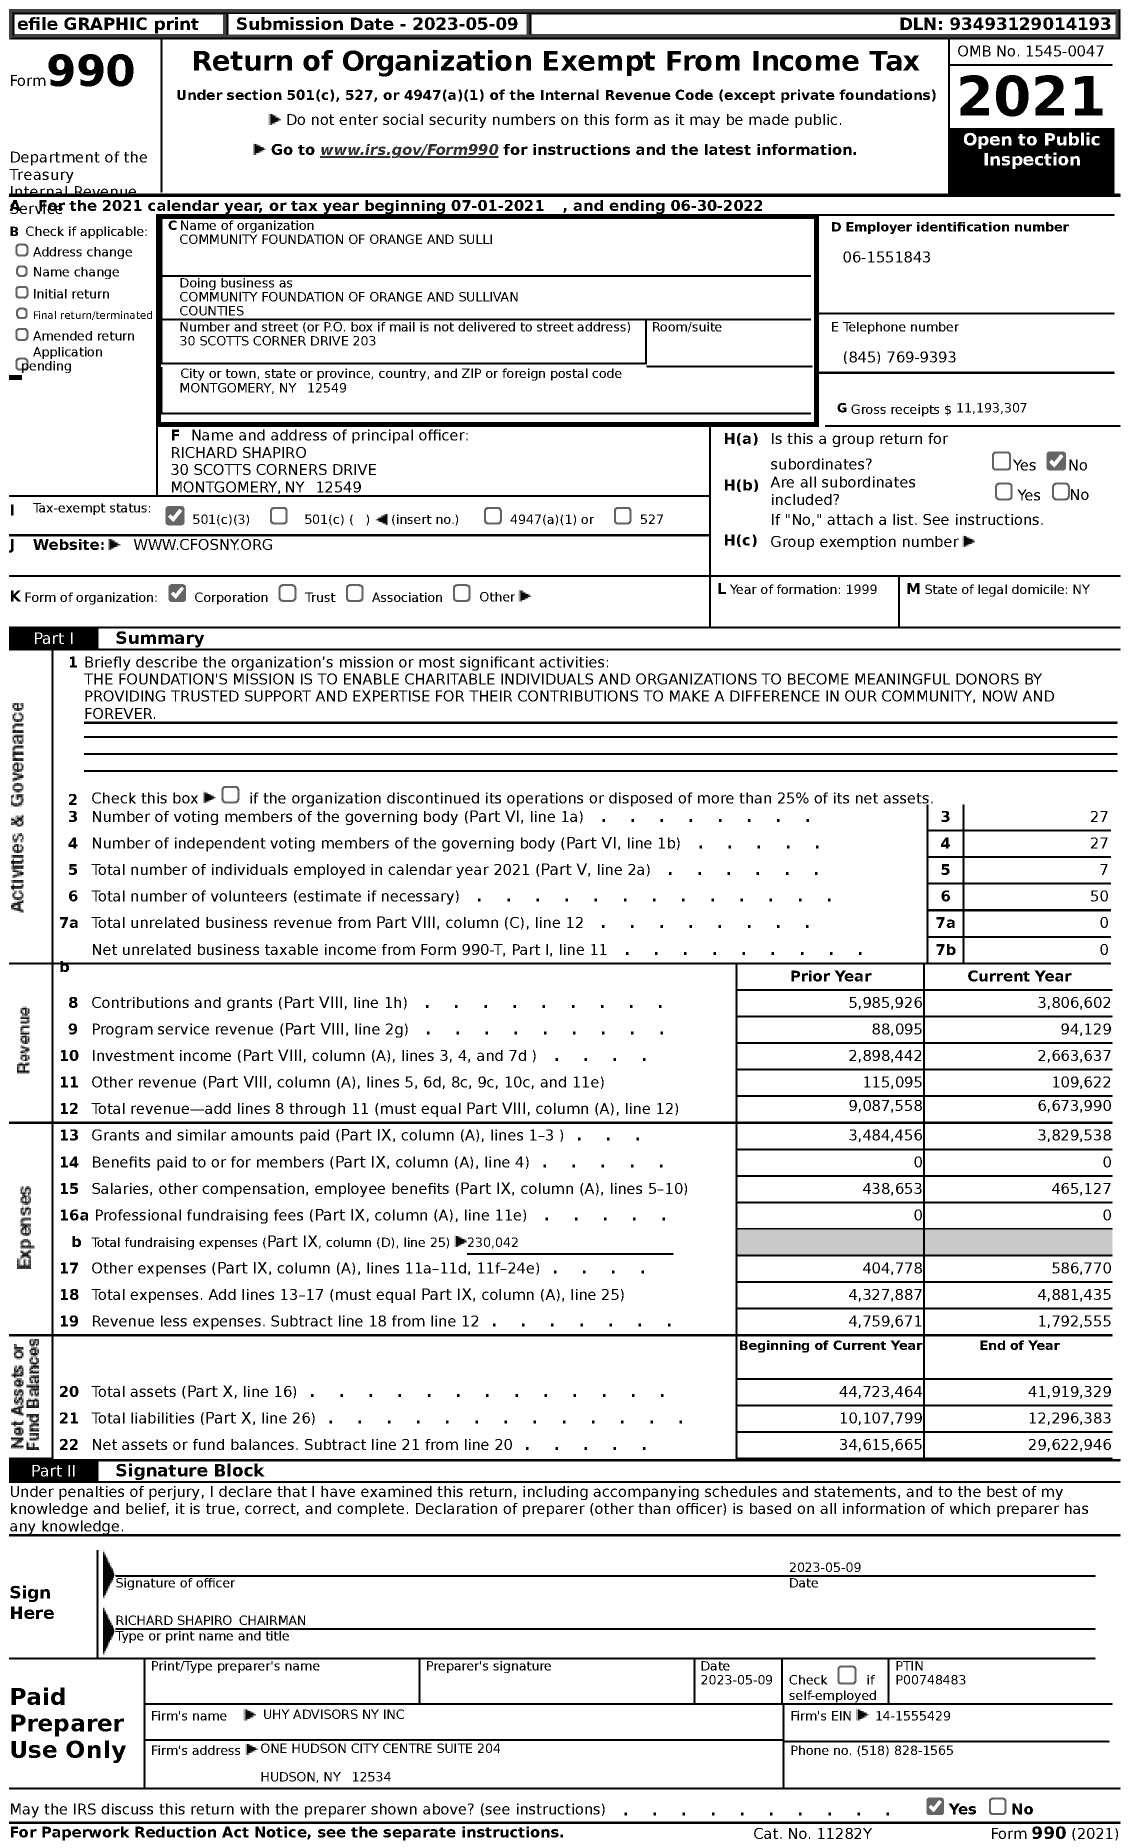 Image of first page of 2021 Form 990 for Community Foundation of Orange and Sullivan Counties (CFOS)